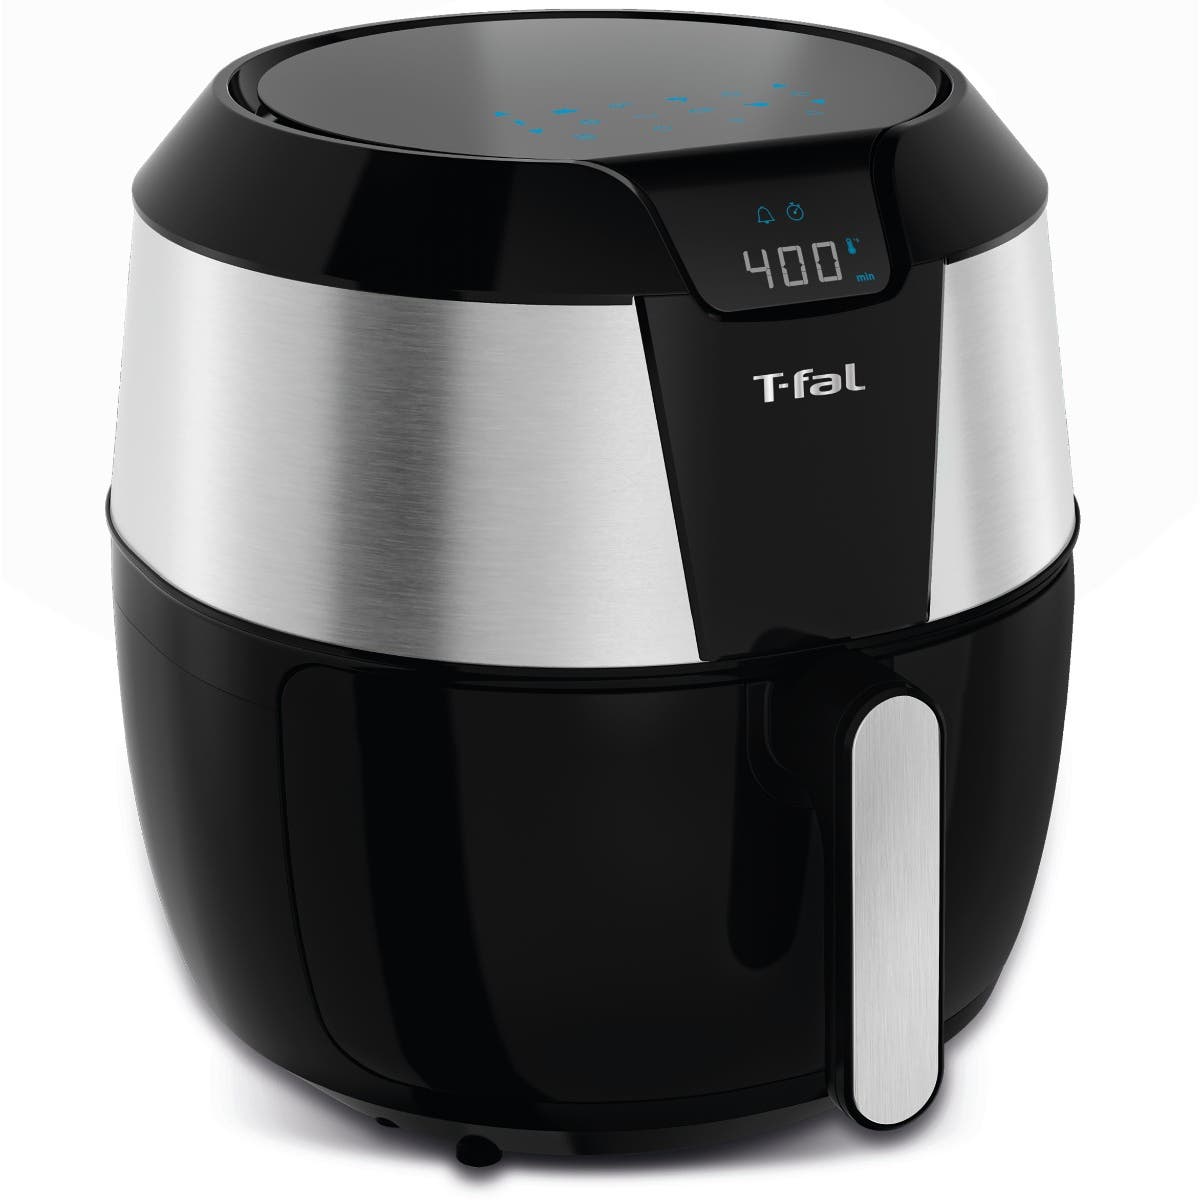 Home and Cook Sales - All-Clad, T-Fal & others $70